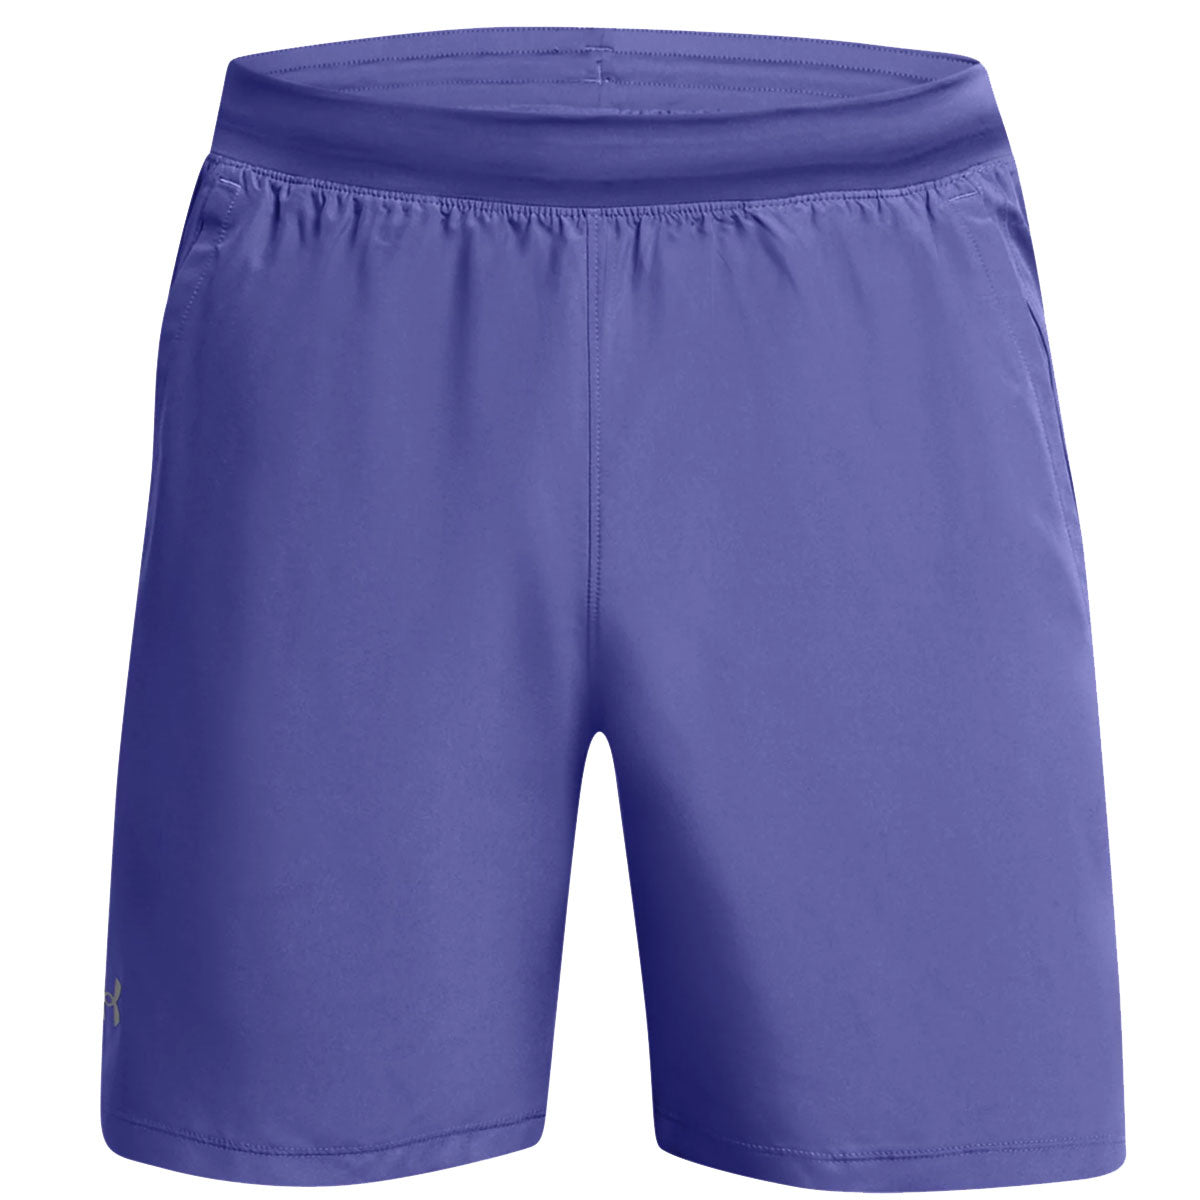 Under Armour Launch 7 inch Running Shorts - Mens - Starlight/Reflective